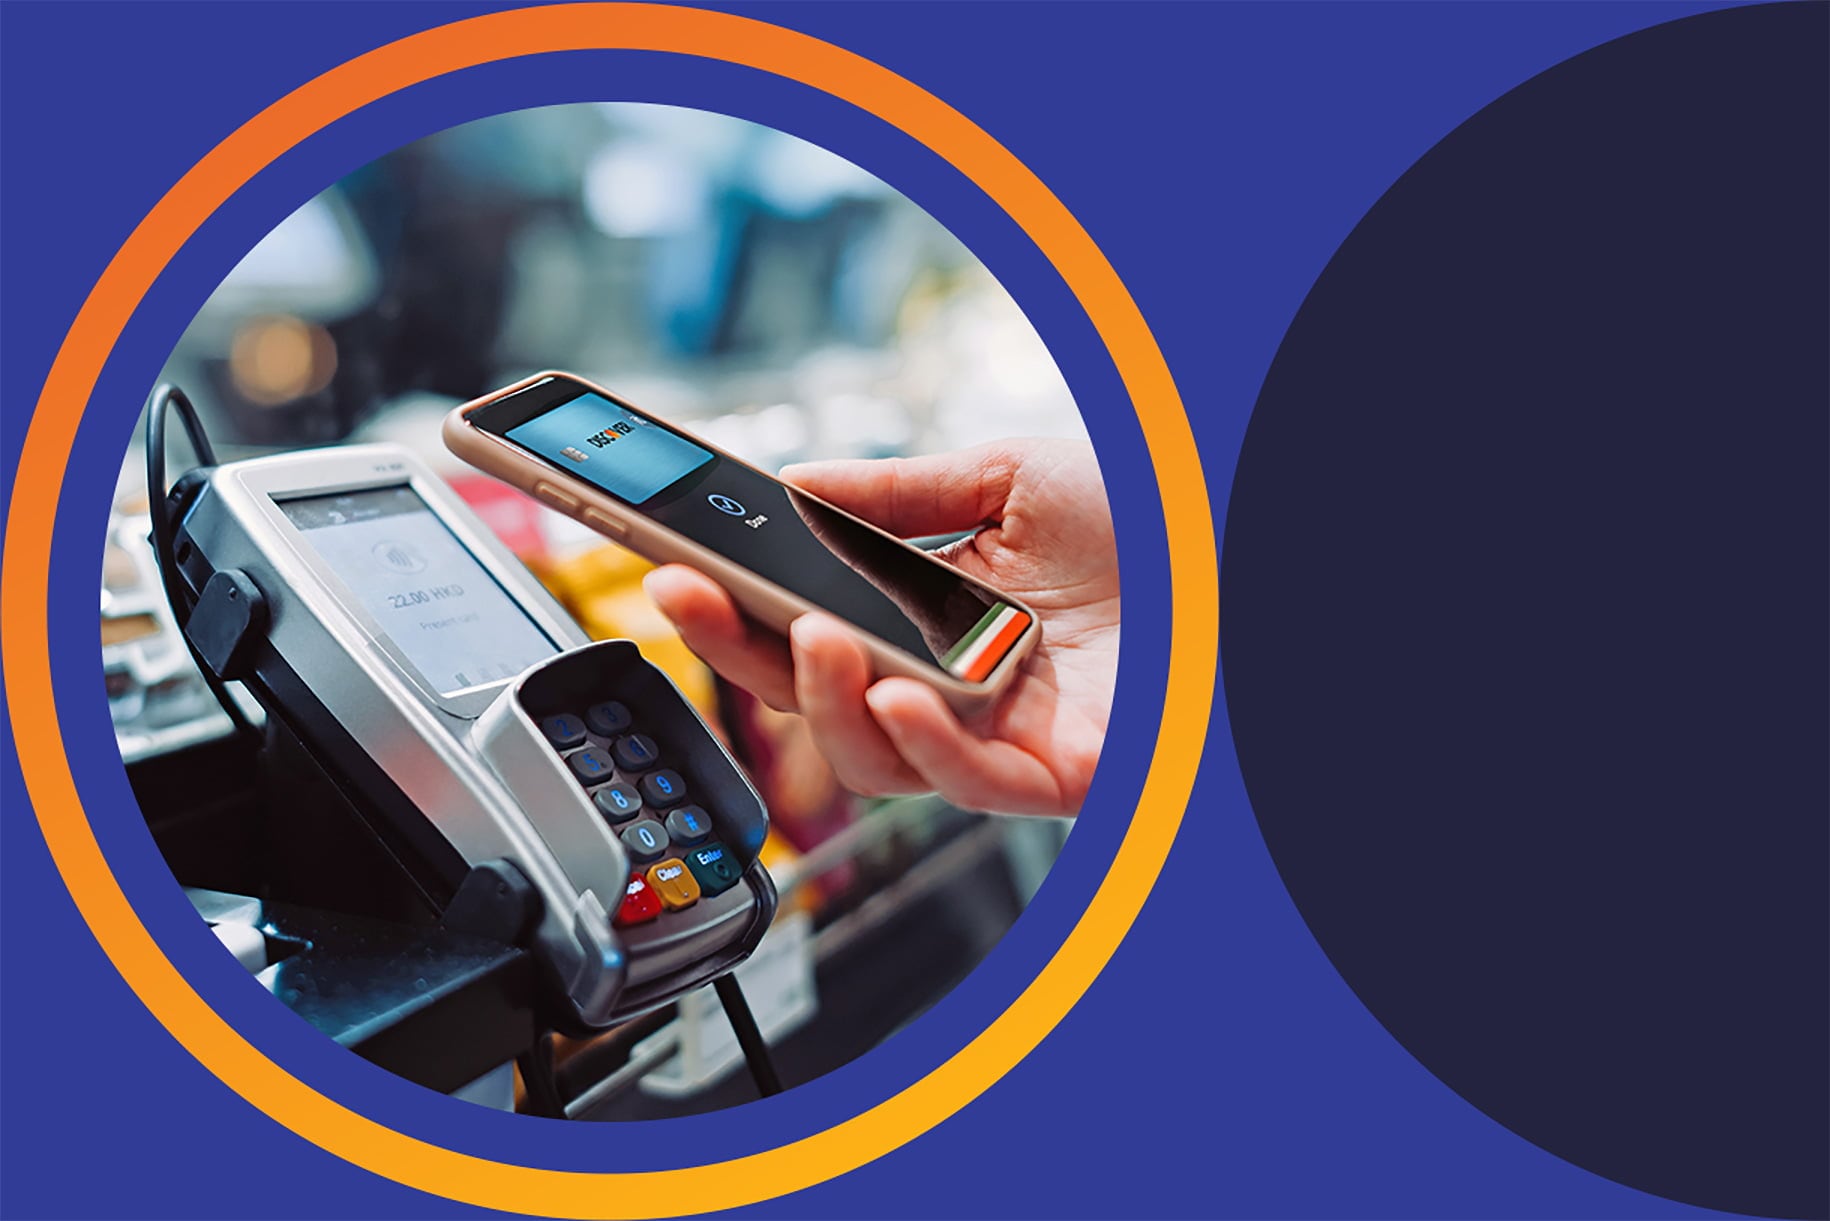 Discover in digital wallet paying at pos